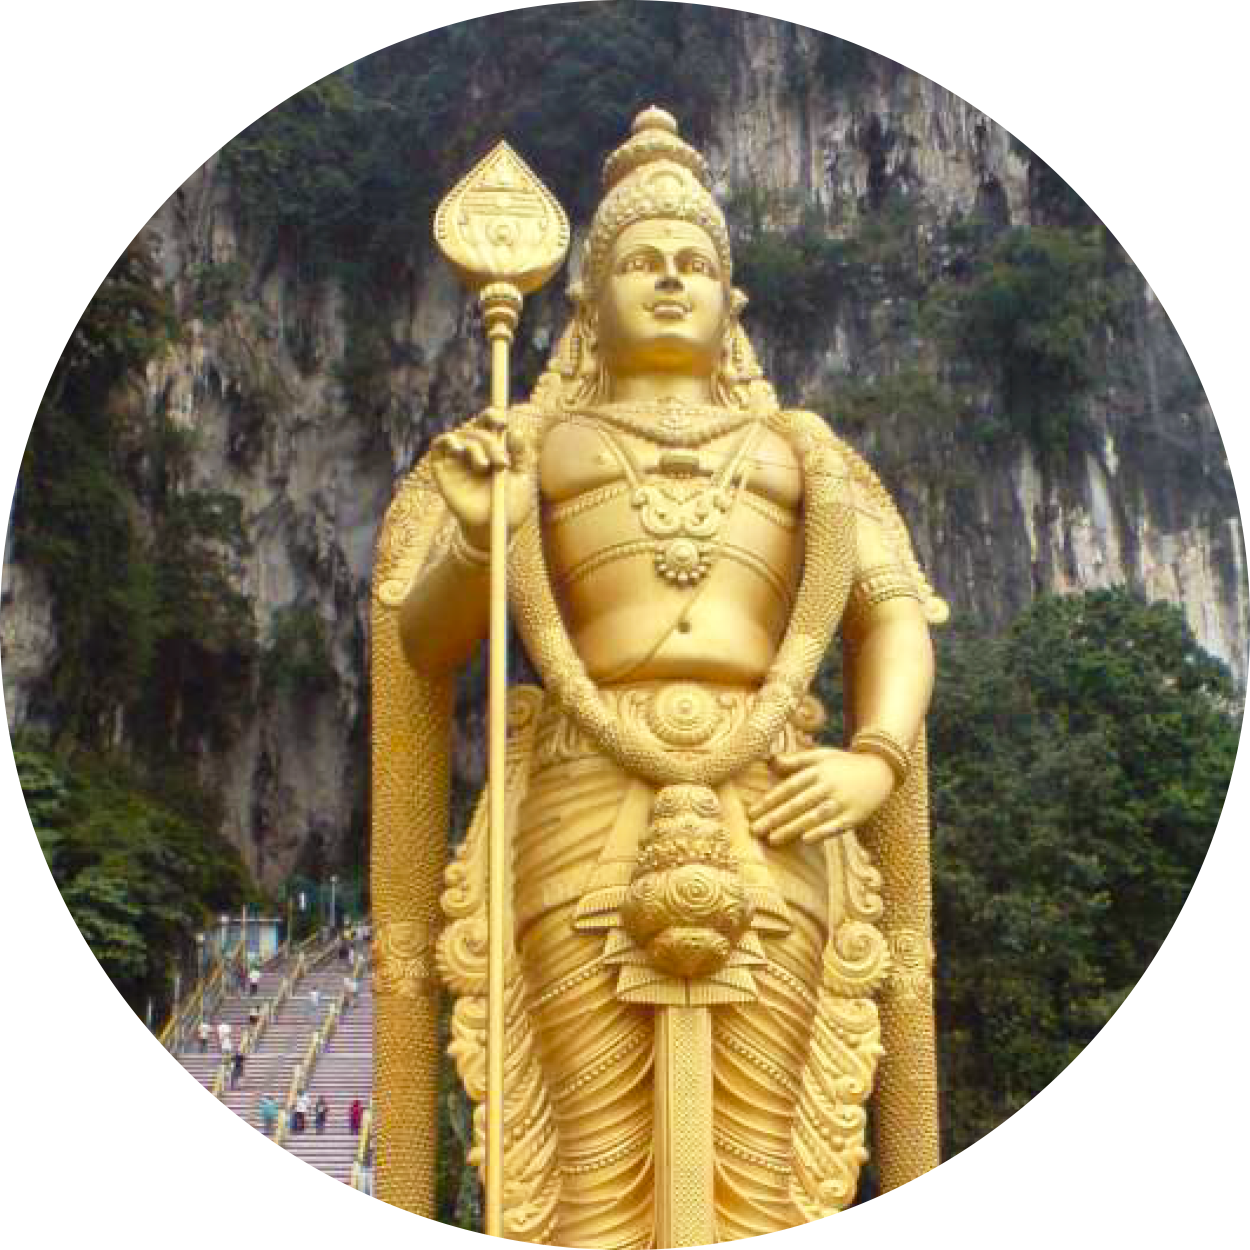 An image of the well-known Batu Caves temple from the fireflies and elephant sanctuary tour package offered by MM Adventure, conducted by our professional nature guides, representing the unique, multicultural heritage sights you can enjoy on vacation in Kuala Lumpur, Malaysia.